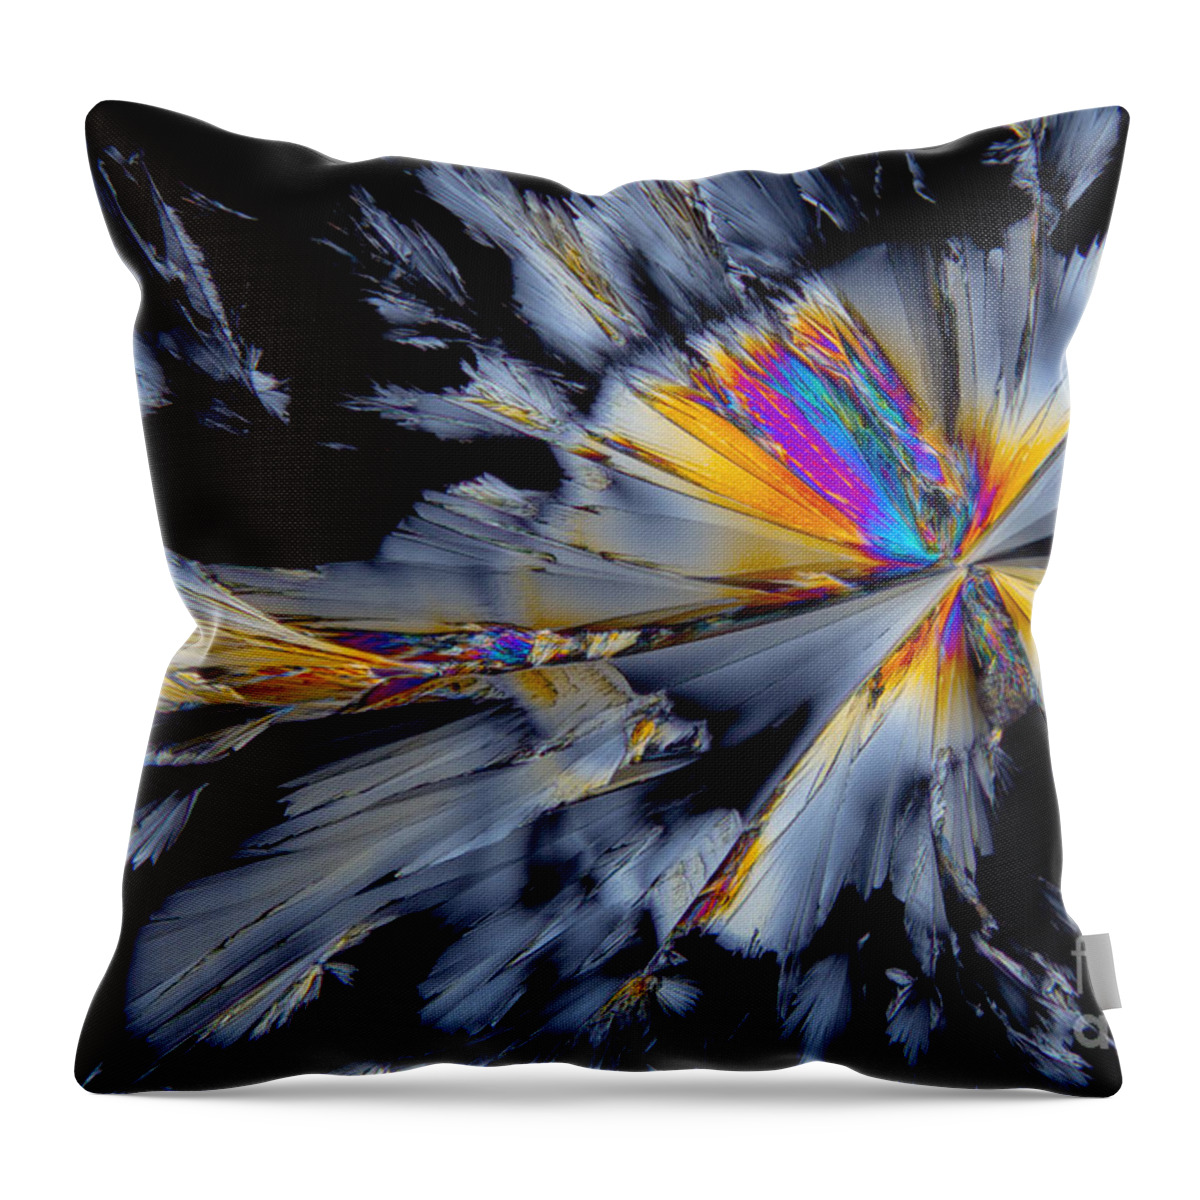 Alcohol Dependence Throw Pillow featuring the photograph Fluoxetine Hydrochloride, Polarized Lm by Antonio Romero